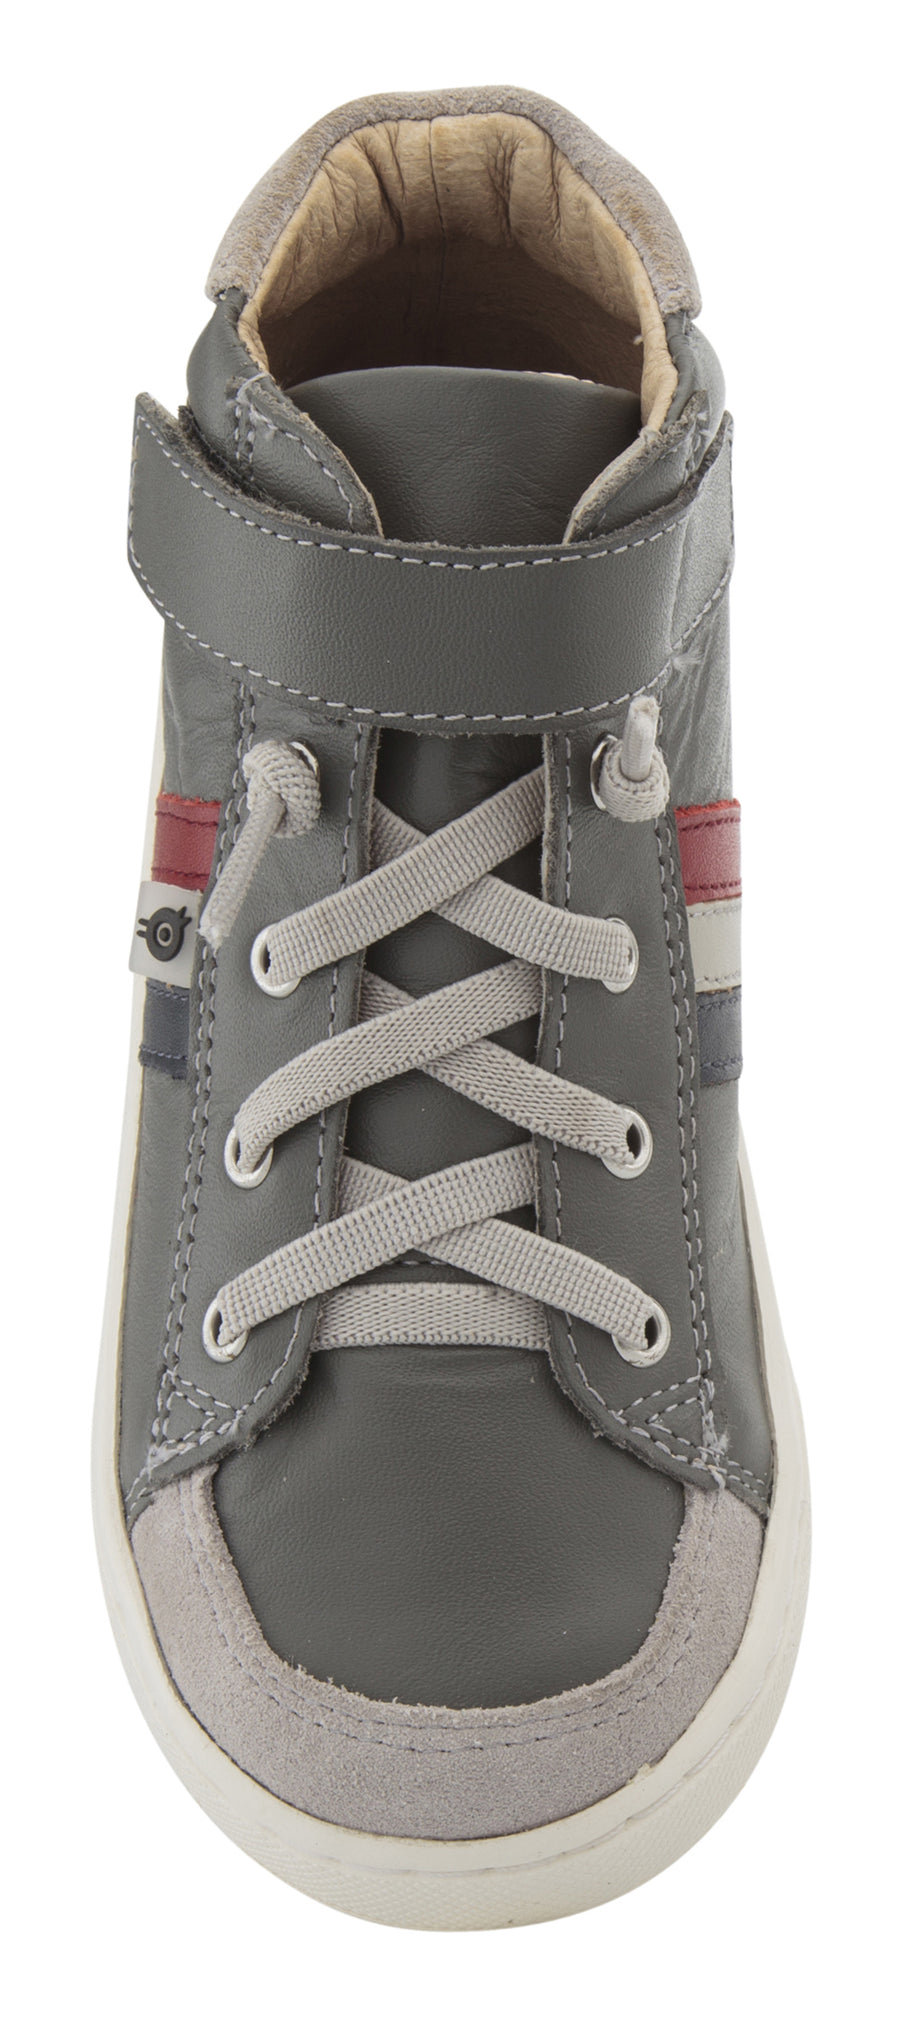 Old Soles Boy's & Girl's  Glambo High Top Leather Sneakers - Grey/Navy/Gris/Red